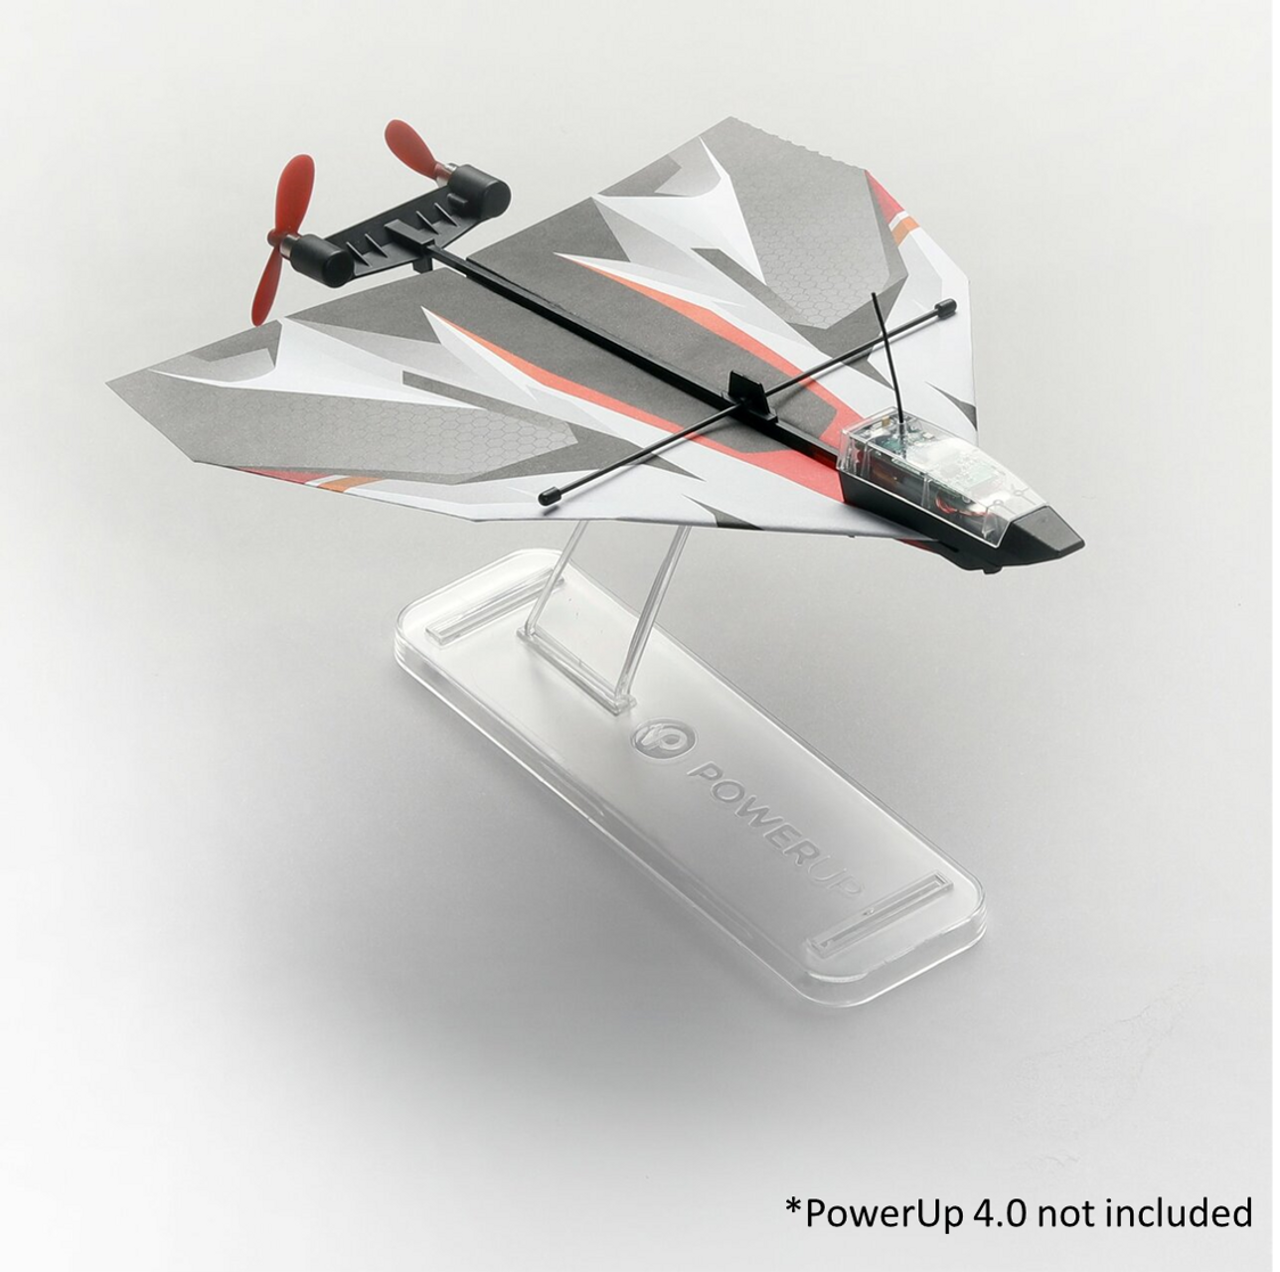 PowerUp 4.0 Smartphone-Operated Paper Airplane Kit